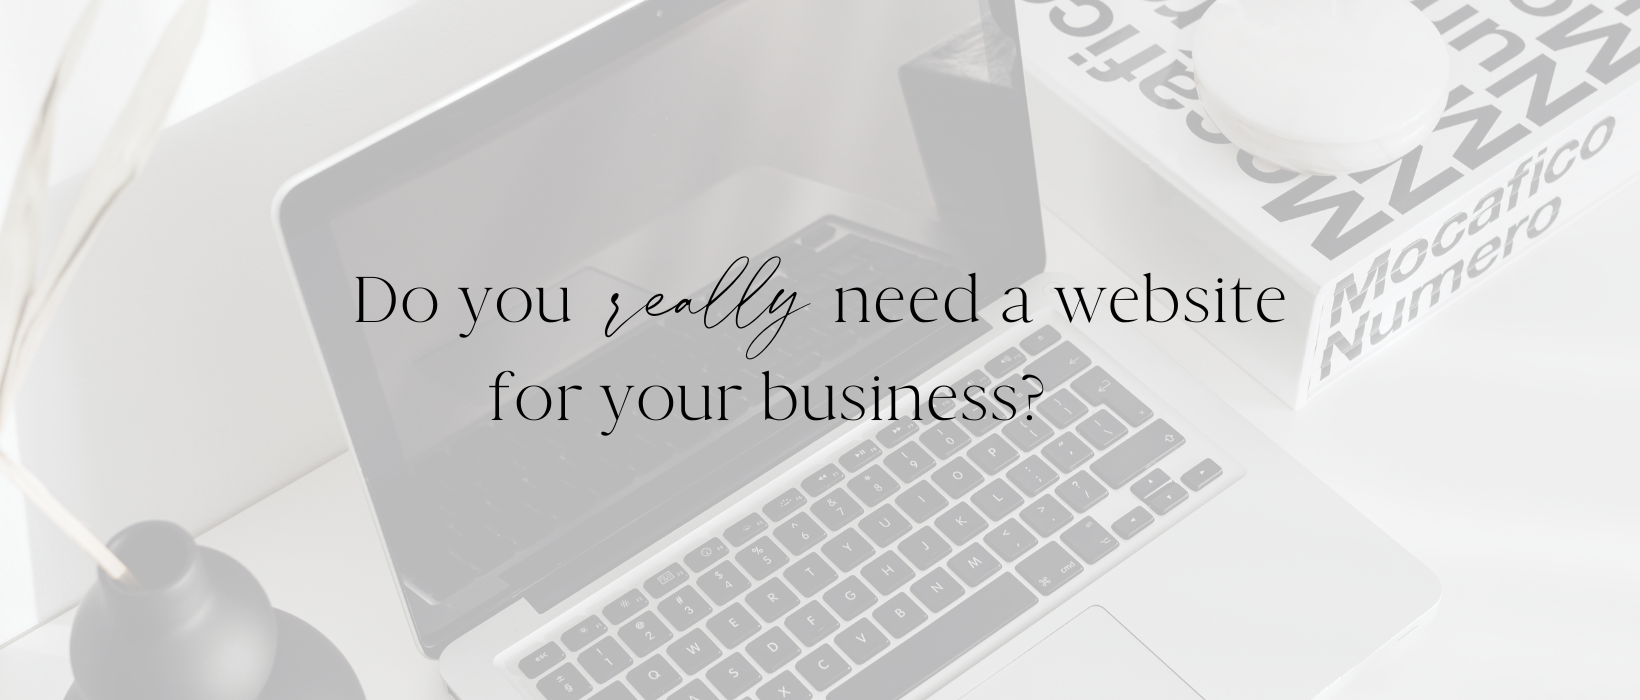 do you really need a website for your business